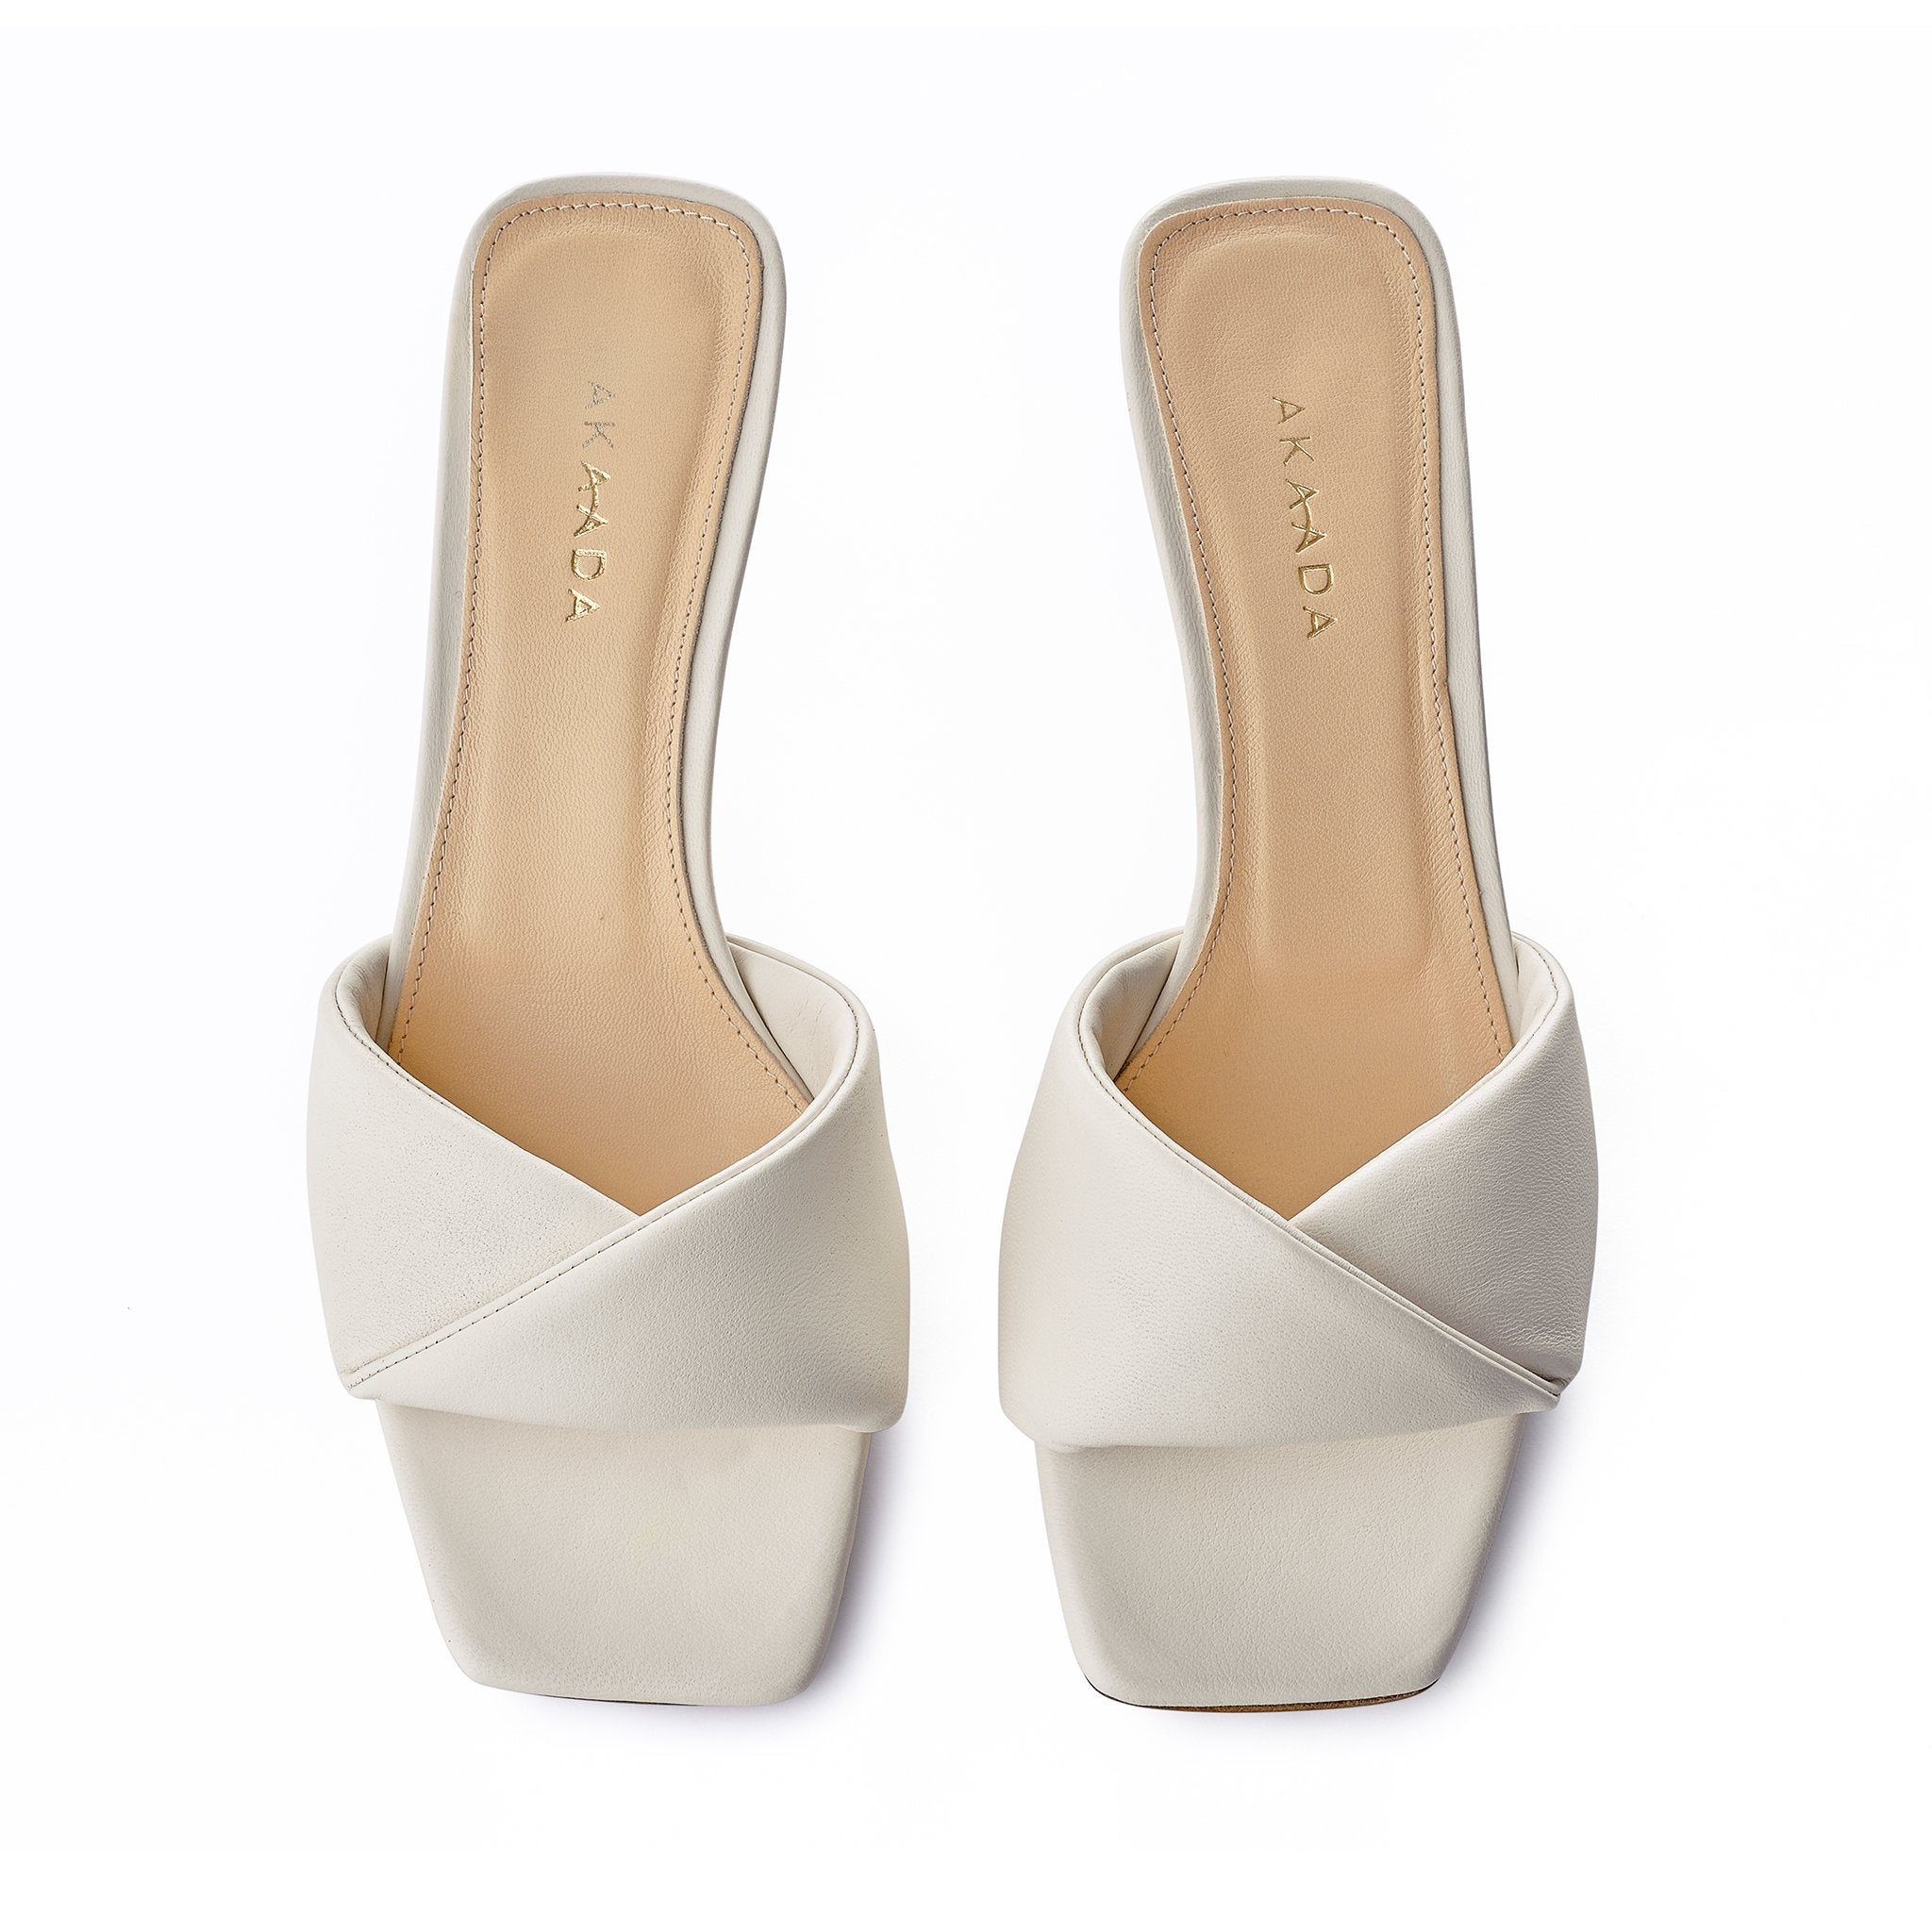 Haya Off White Soft Leather Sandals 1413-01 - 6